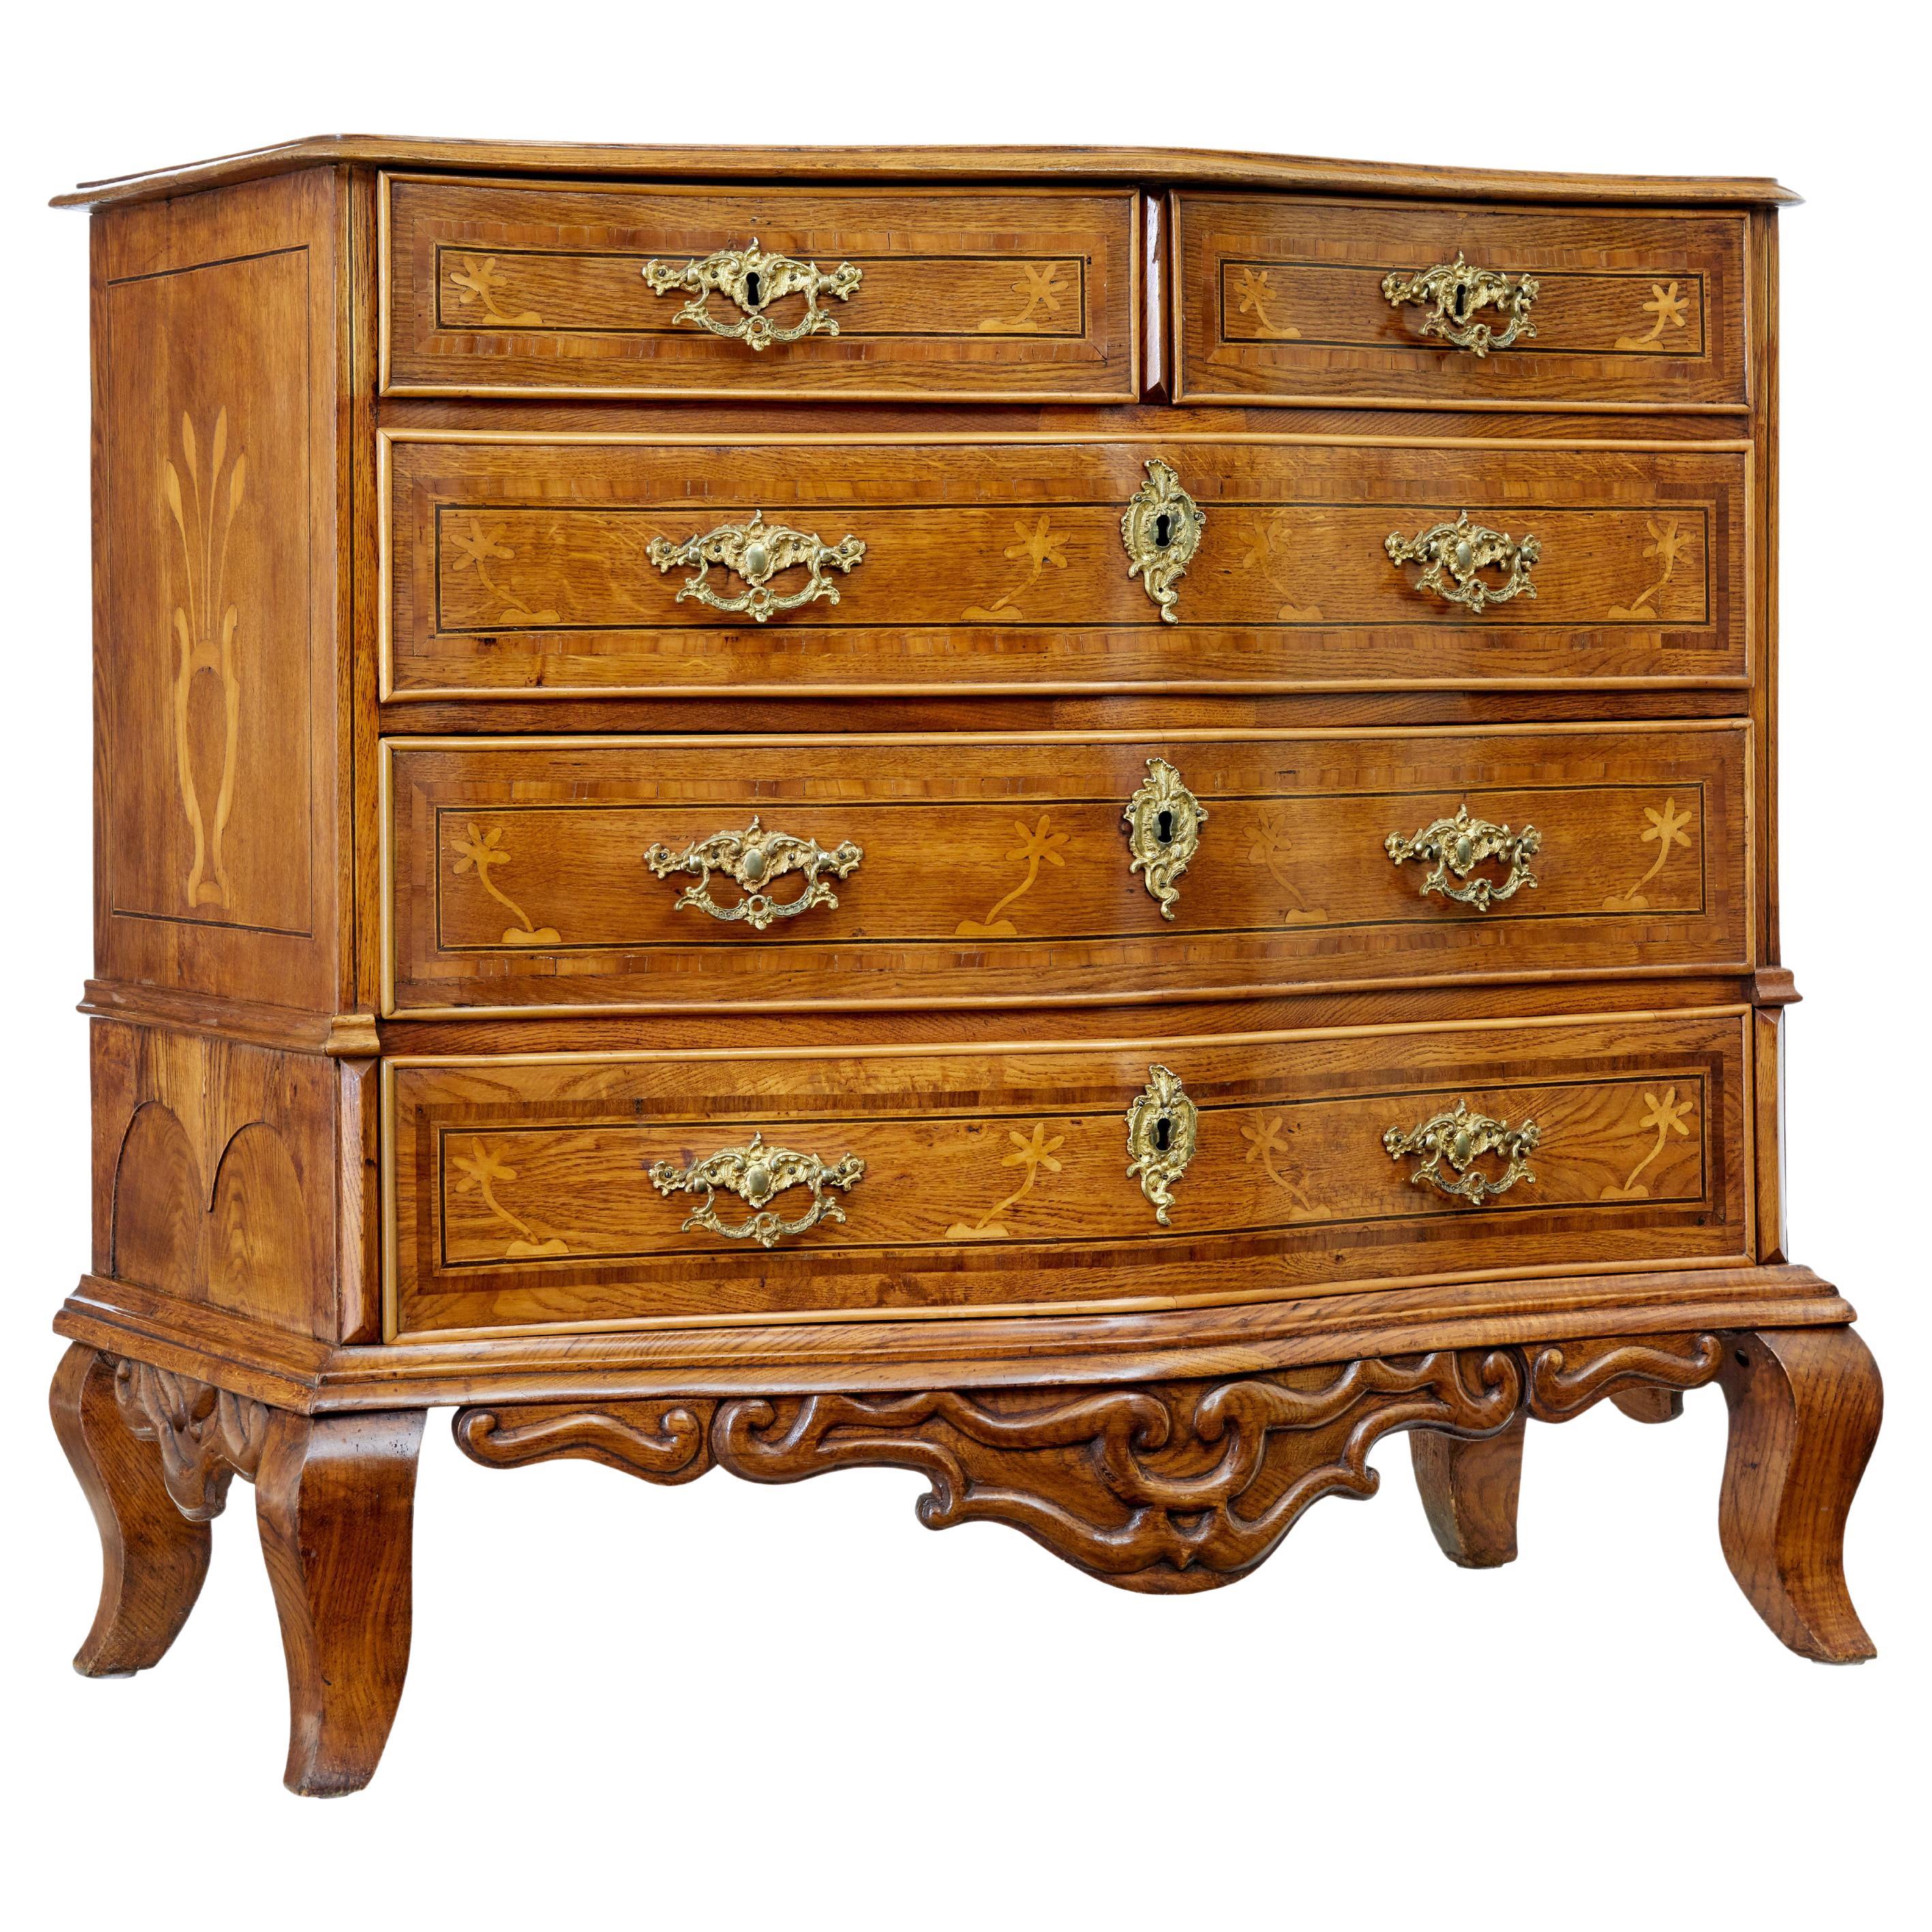 Early 19th Century Swedish Oak Inlaid Chest of Drawers For Sale